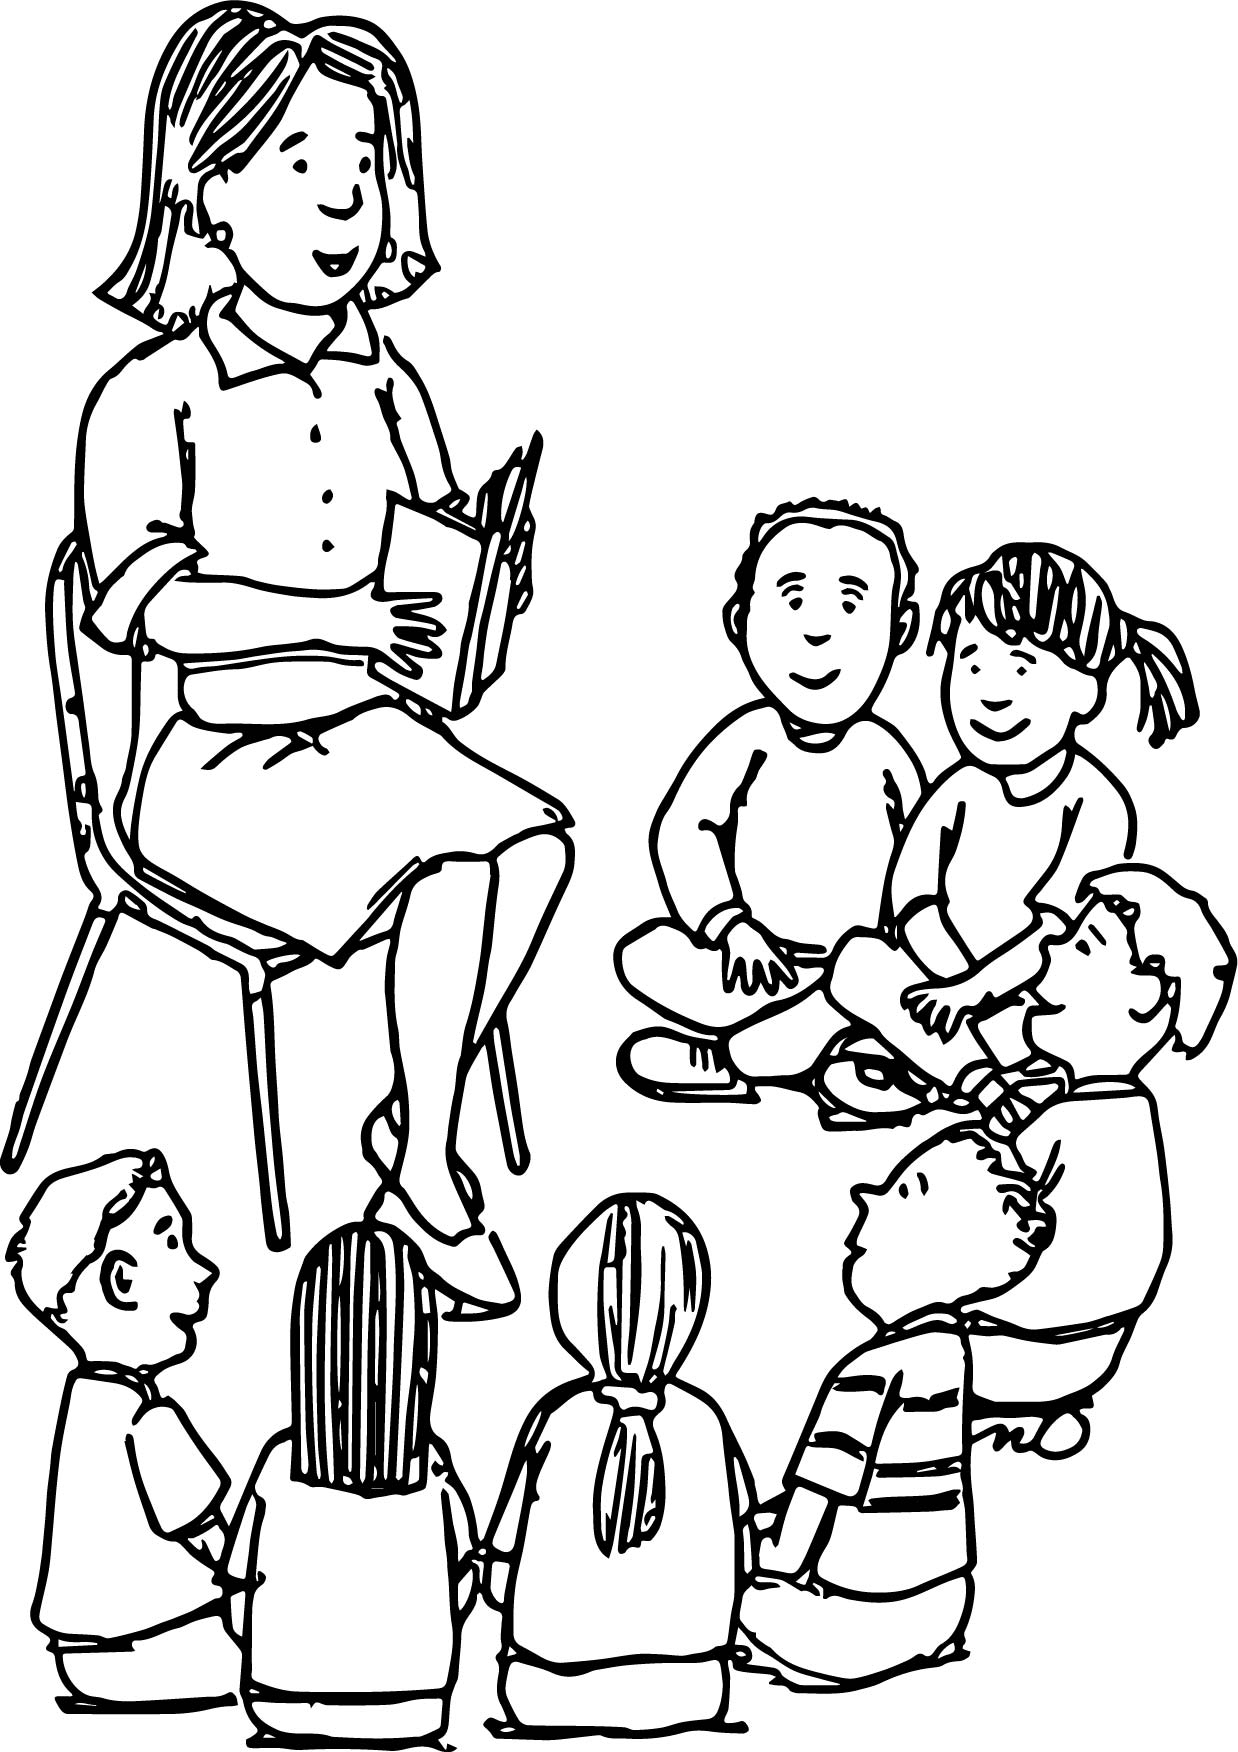 teaching character coloring pages